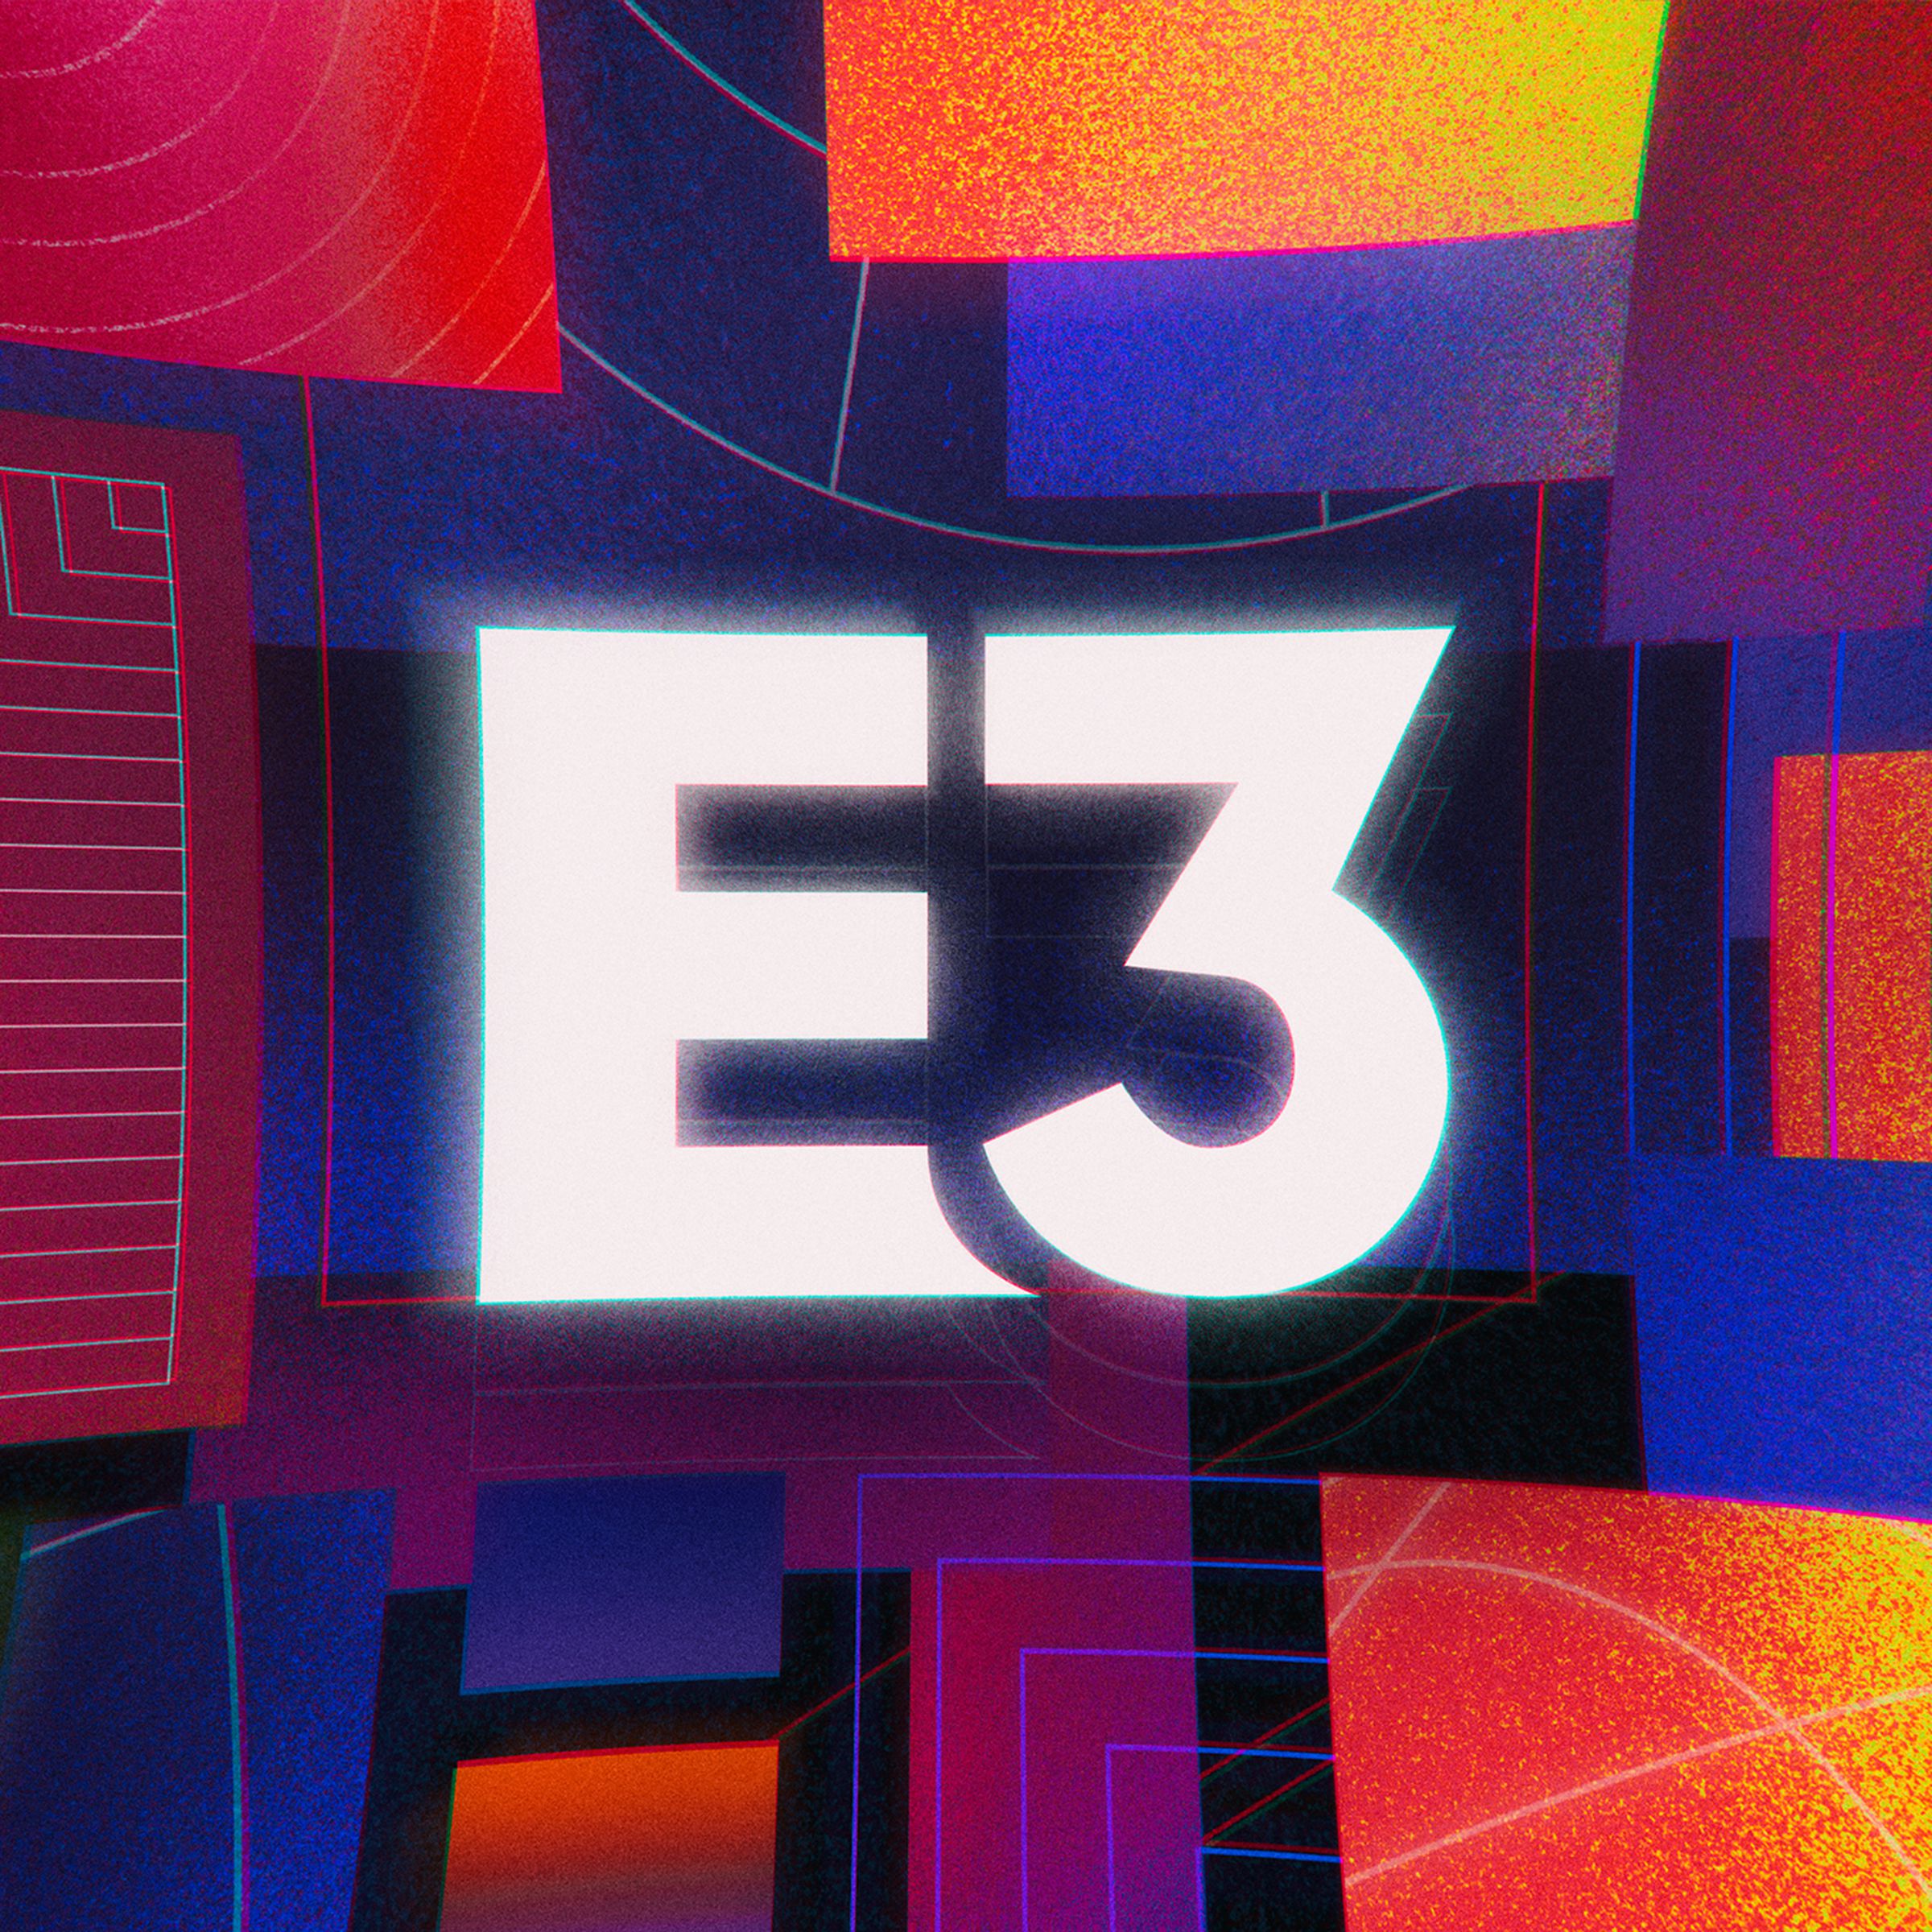 Illustration of the E3 logo on a background of red, orange, and blue squares.